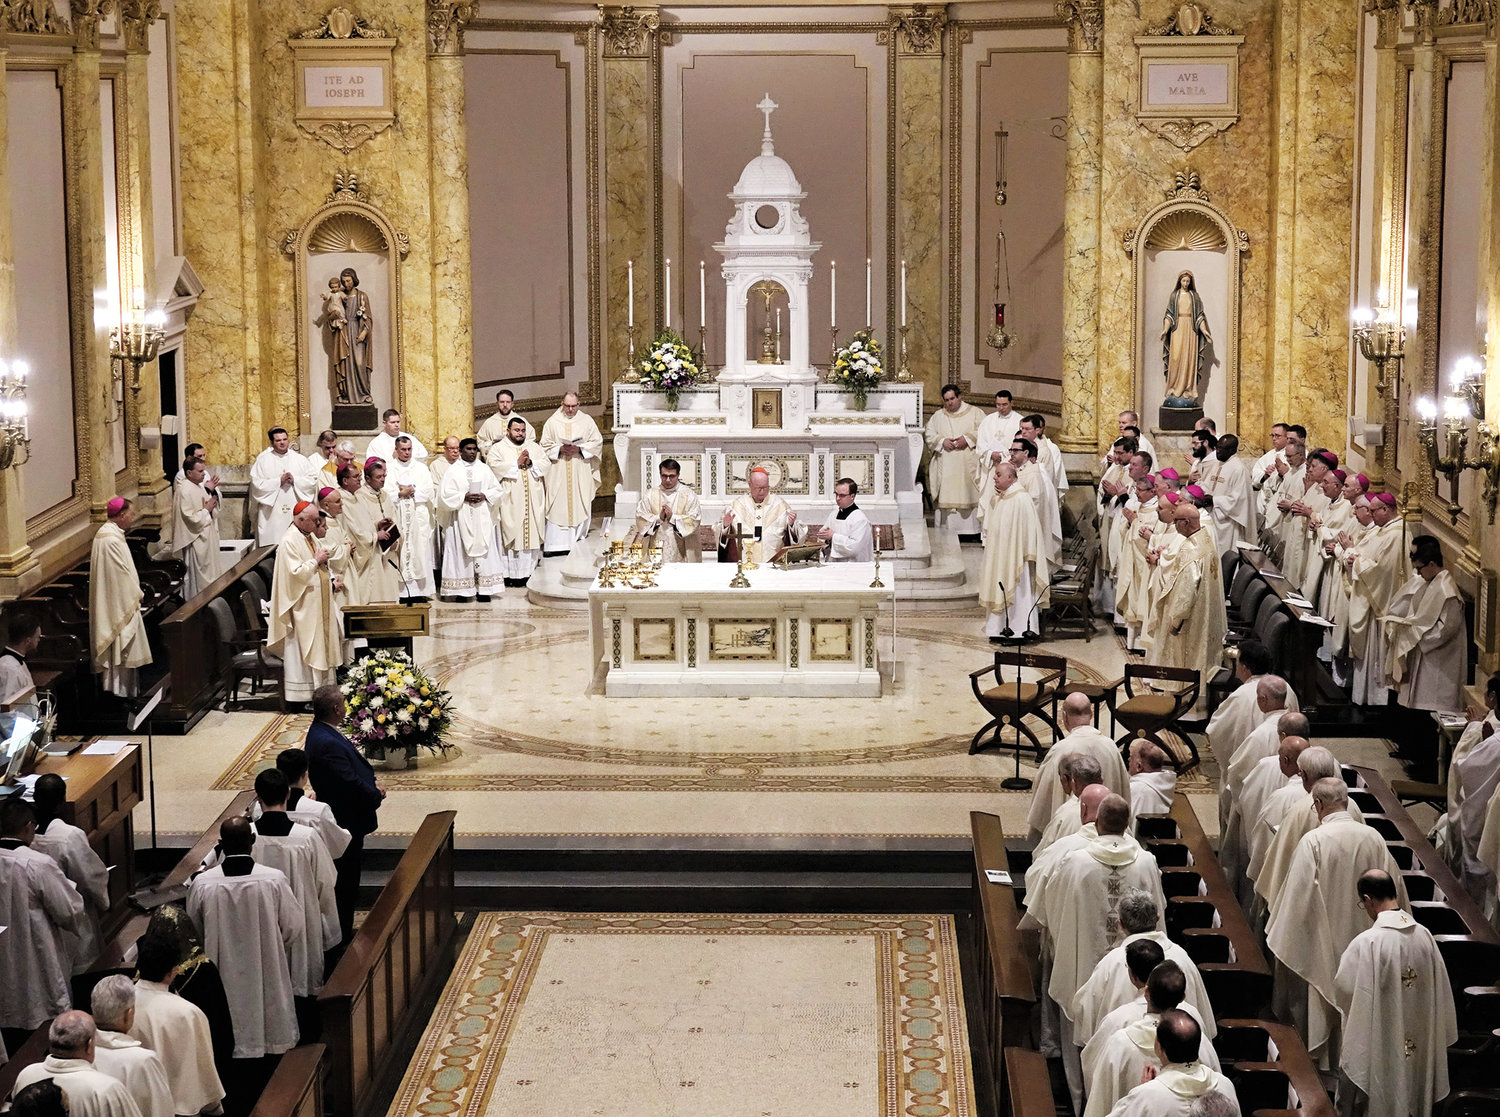 Cardinal Dolan celebrates Mass marking the 125th anniversary celebration of St. Joseph’s Seminary, Dunwoodie. Many prelates, priests, deacons, seminarians fill the sanctuary and pews of the seminary chapel for the March 24 liturgy.